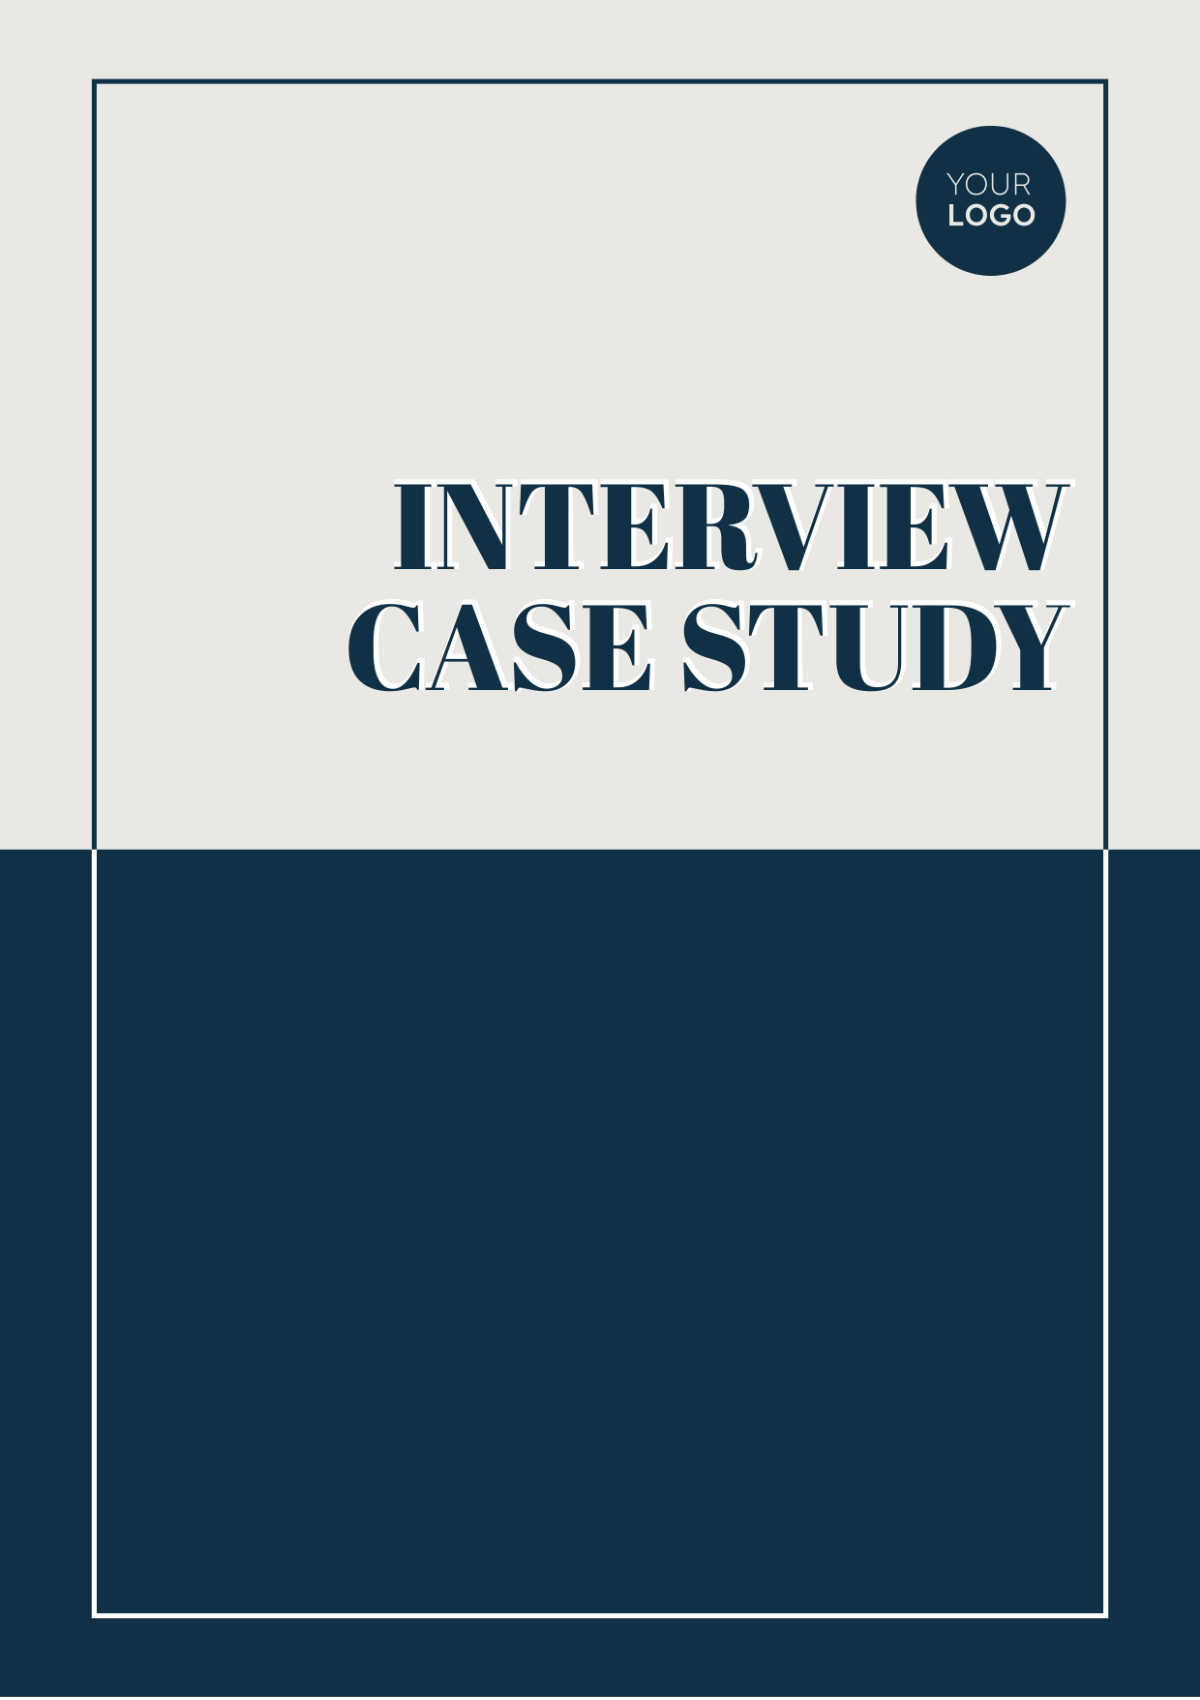 Interview Case Study Template